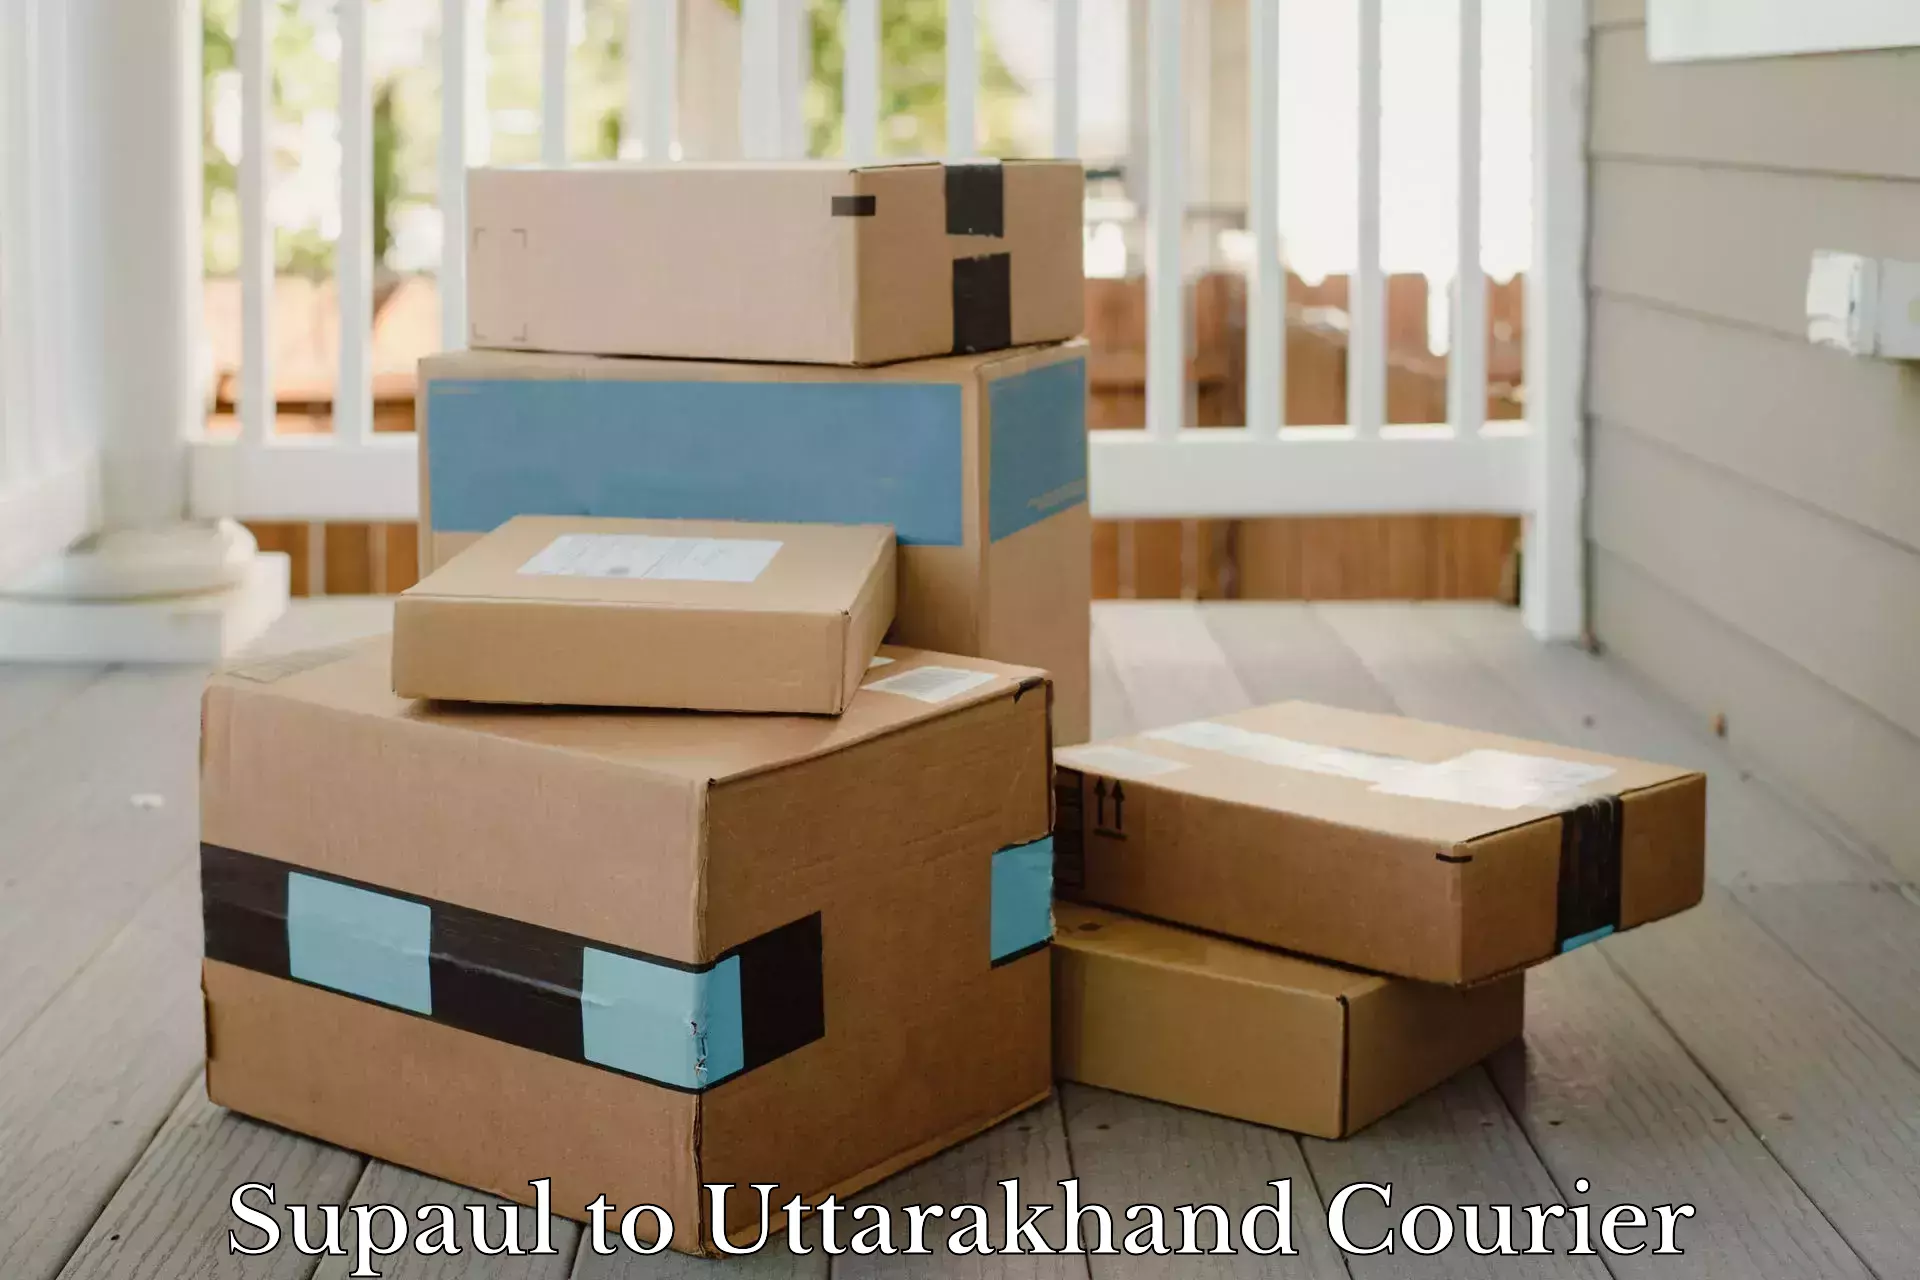 Package delivery network Supaul to Khatima